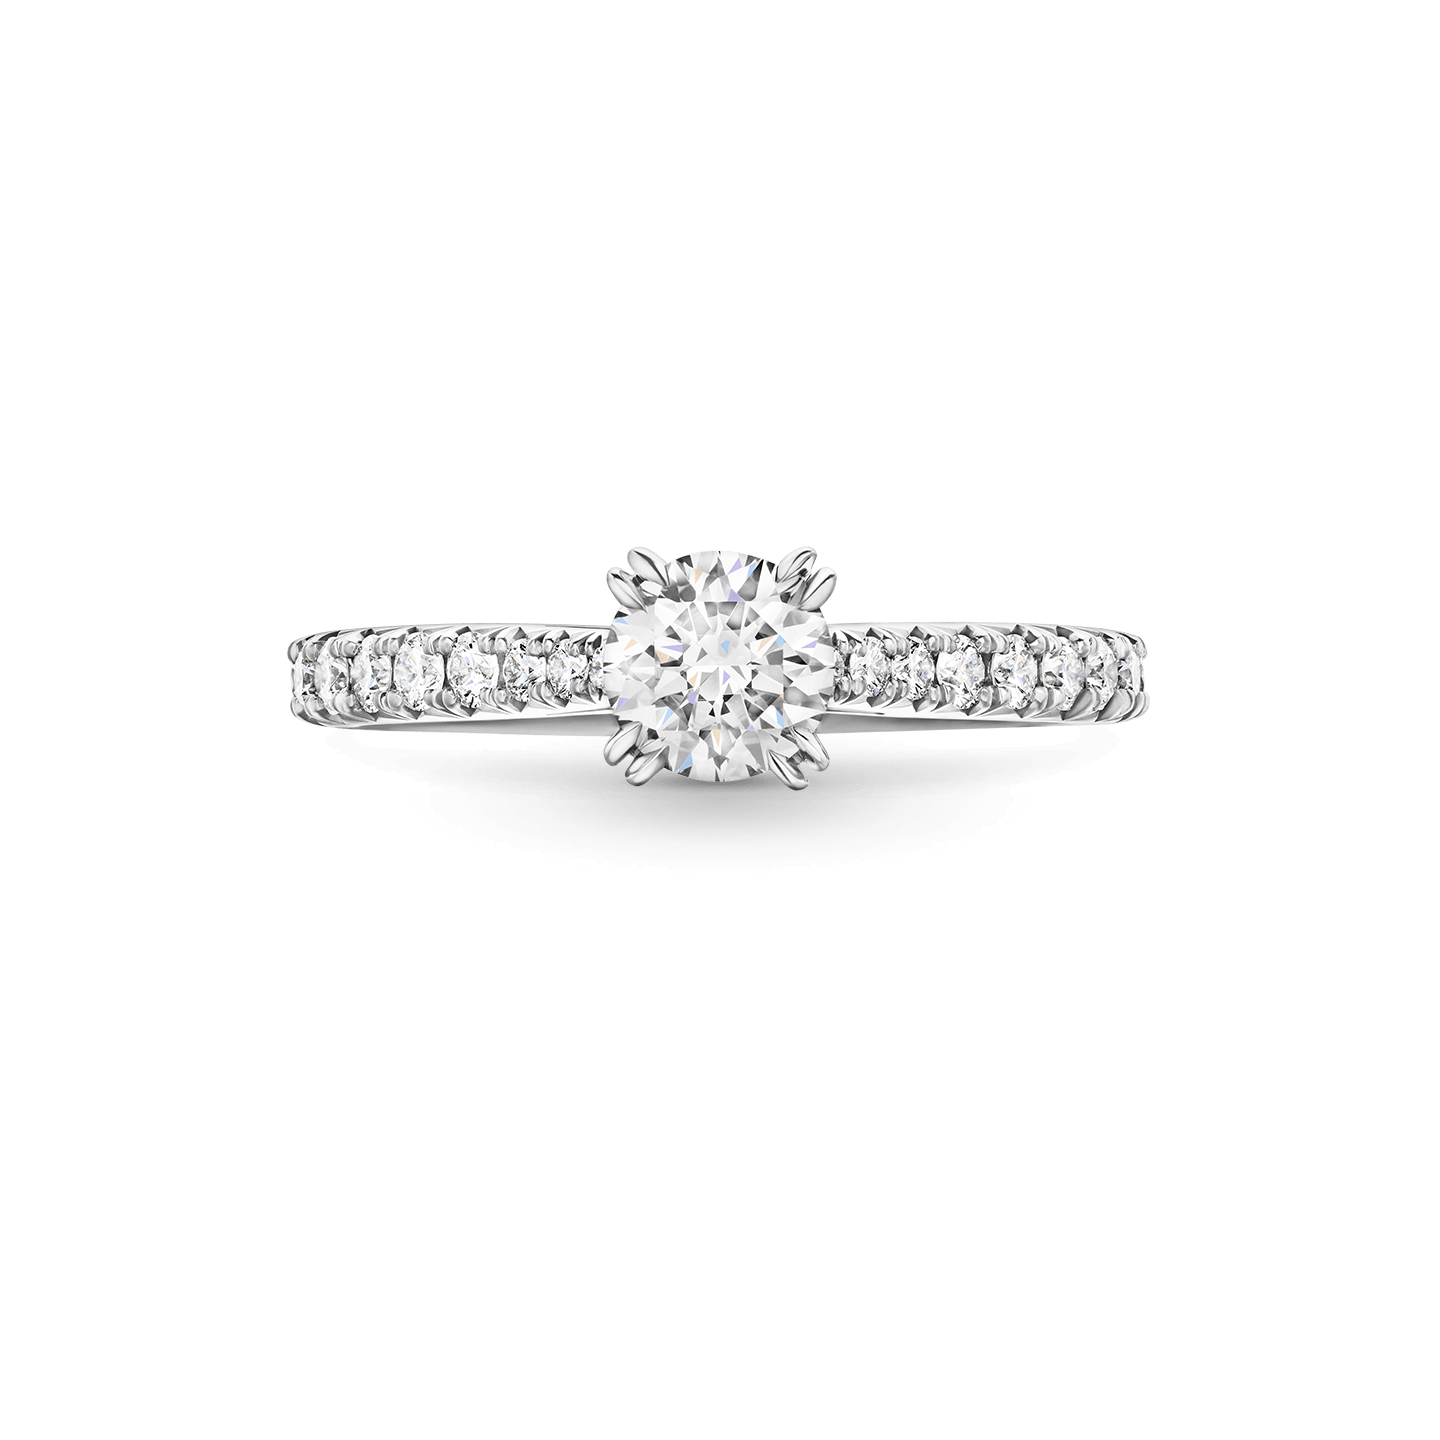 Front view of the Brilliant Love Diamond Engagement Ring